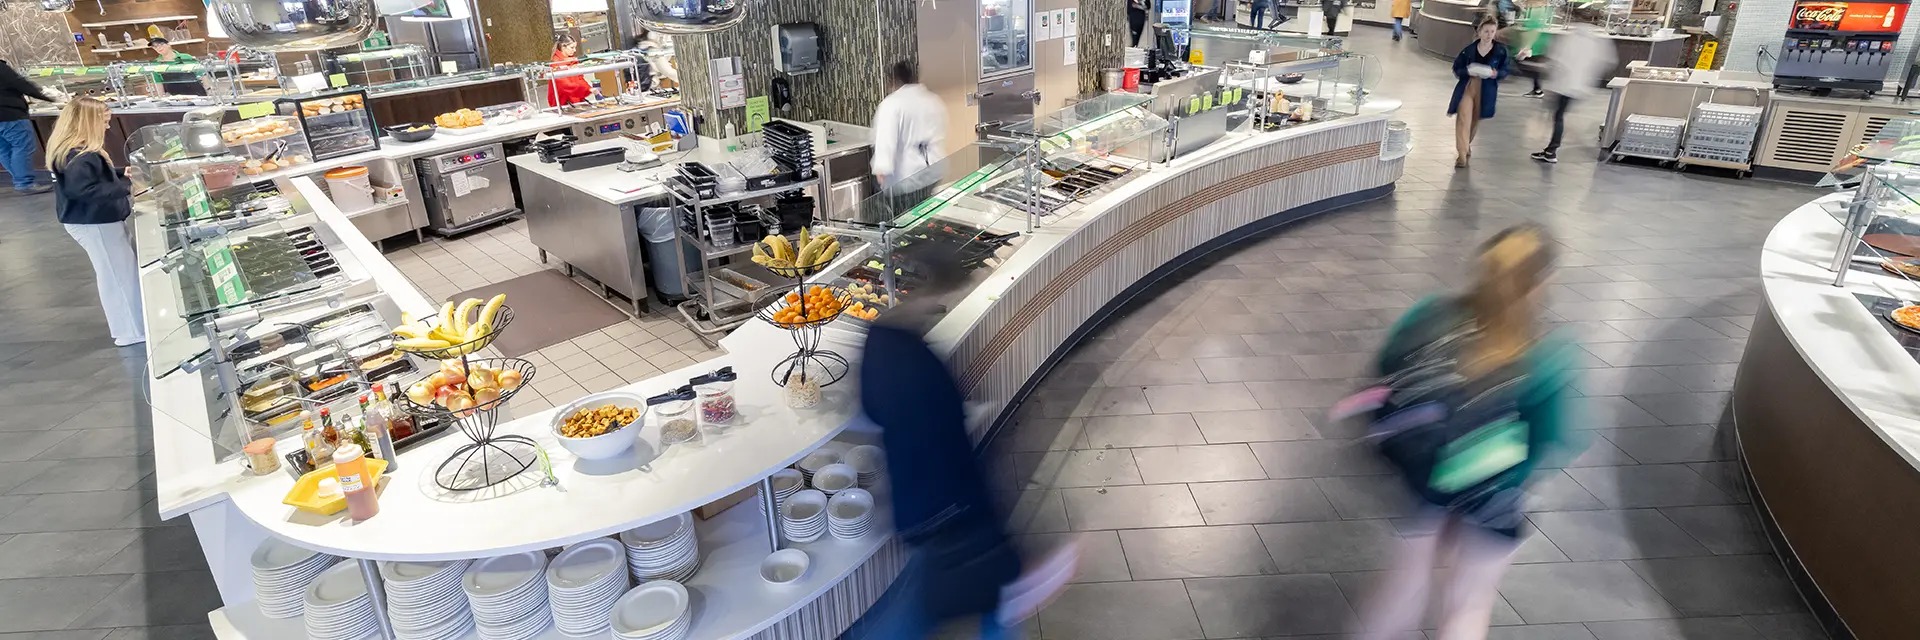 dining center salad bar area with motion blur